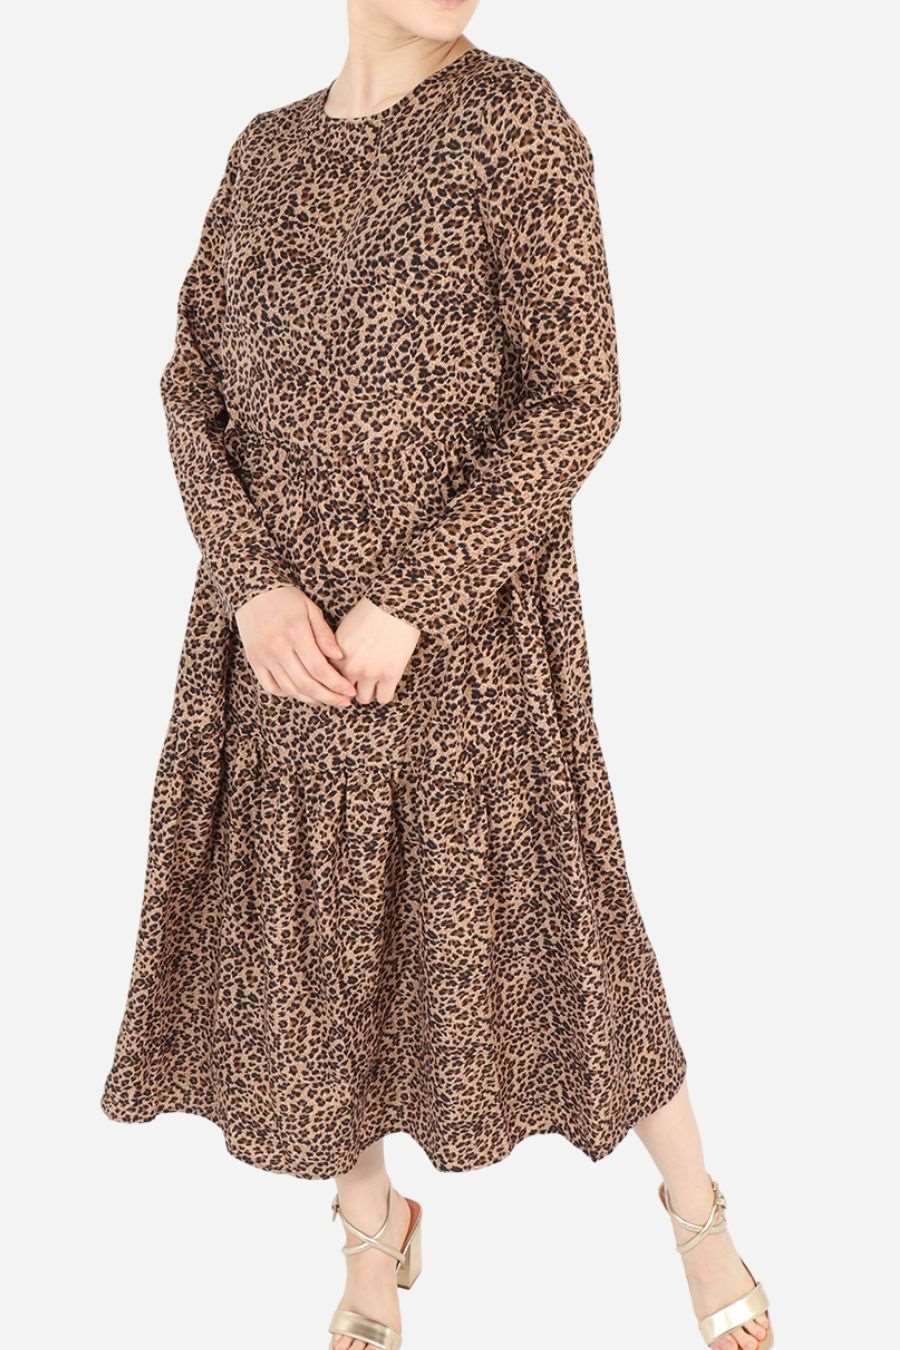 Neutral Leopard Print Tiered Dress with Pockets - Allison's Boutique